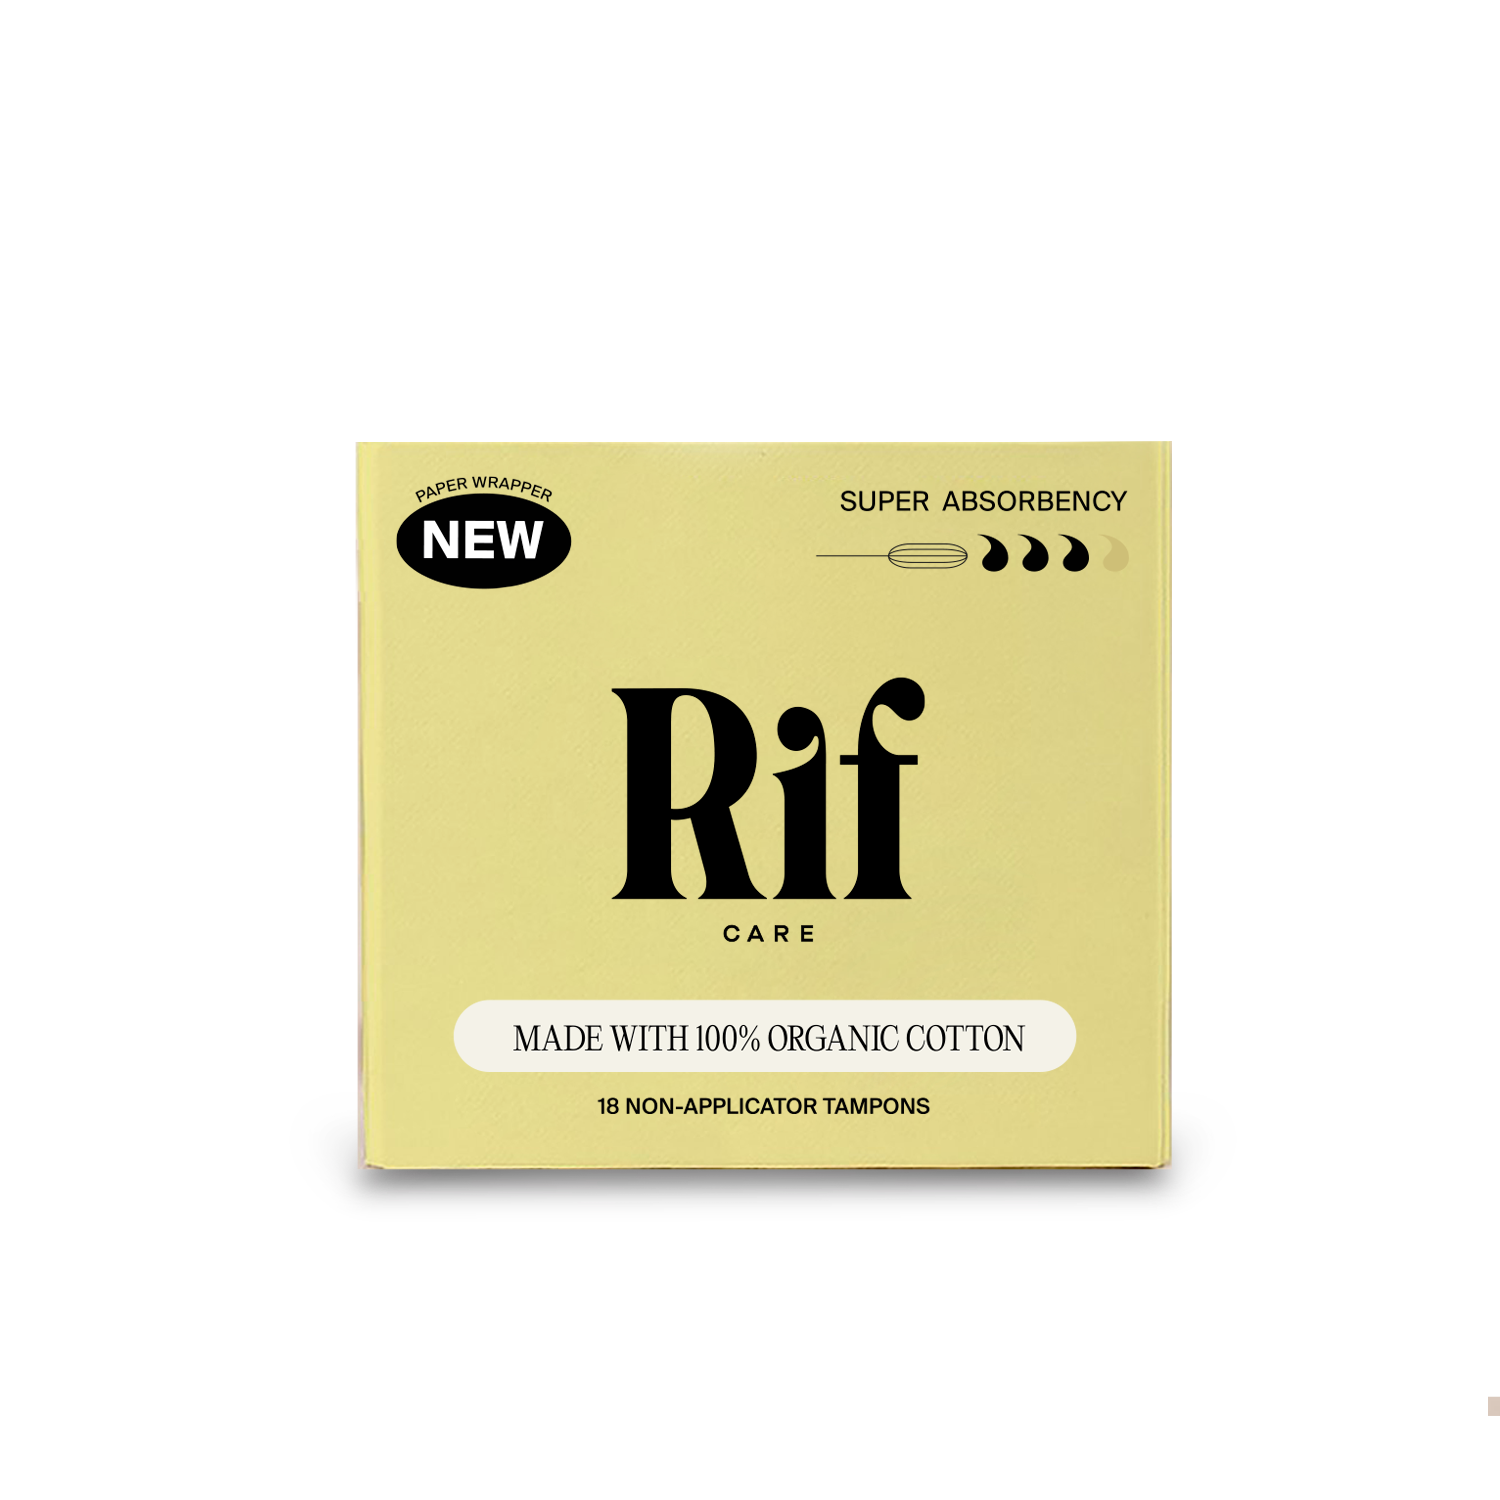 Organic Cotton Non-Applicator Tampons Super Absorbency – Rif care